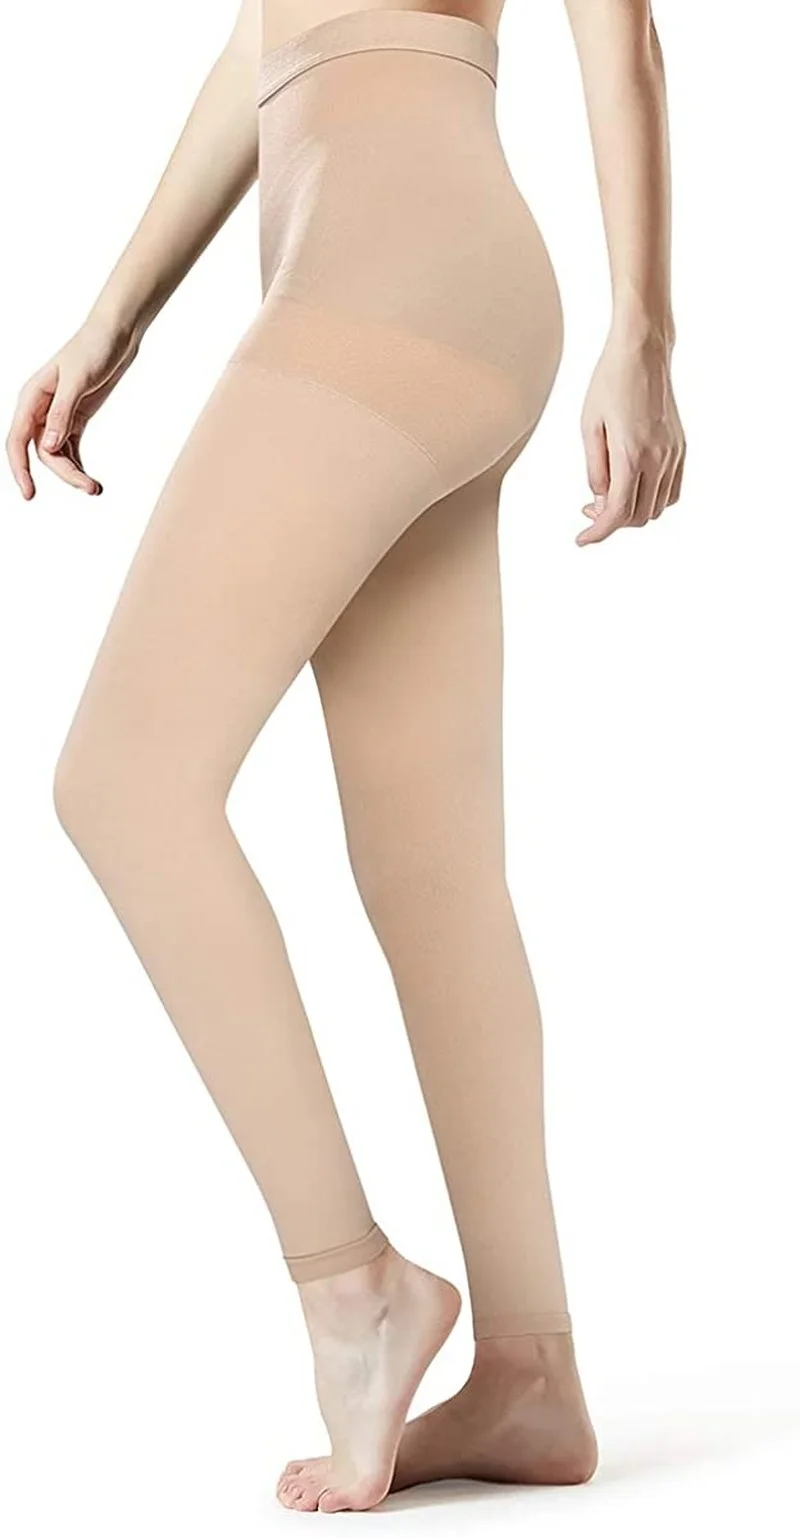 

Medical Compression Pantyhose Stockings for Women Opaque Support 15-20mmHg Firm Graduated Hose Tights